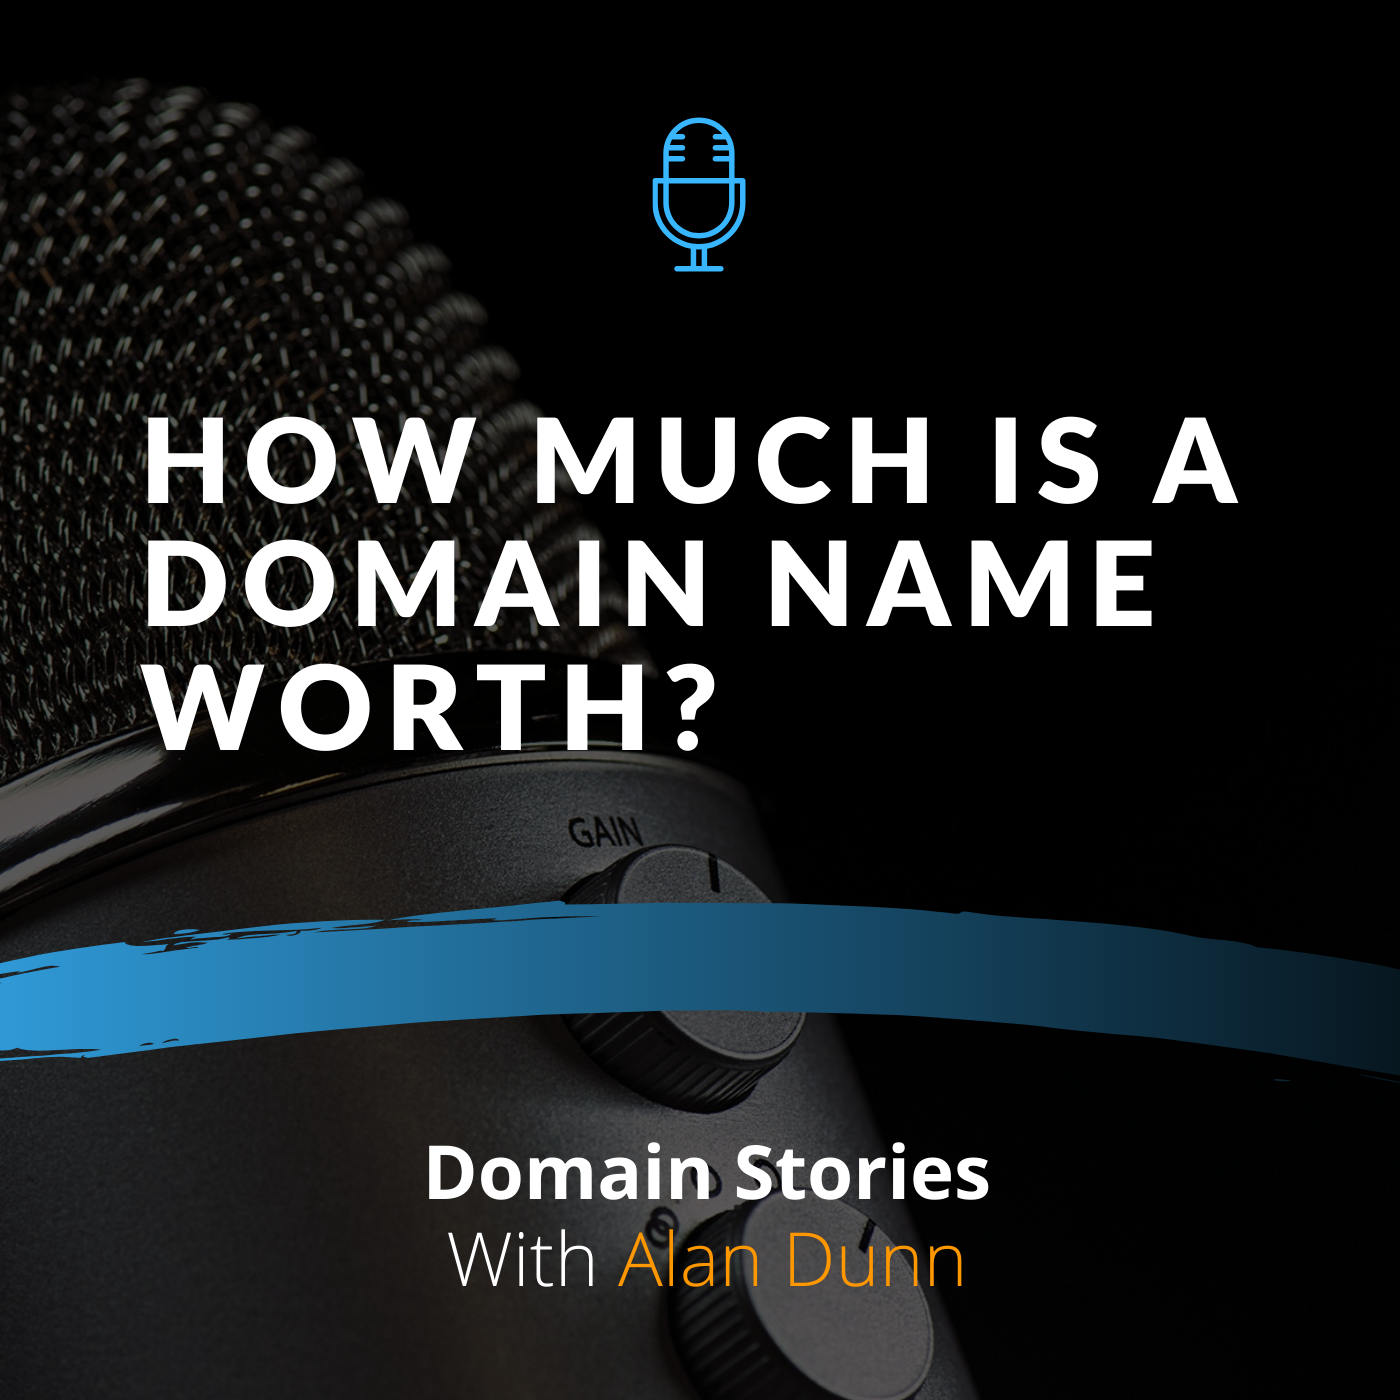 How Much Is a Domain Name Worth?